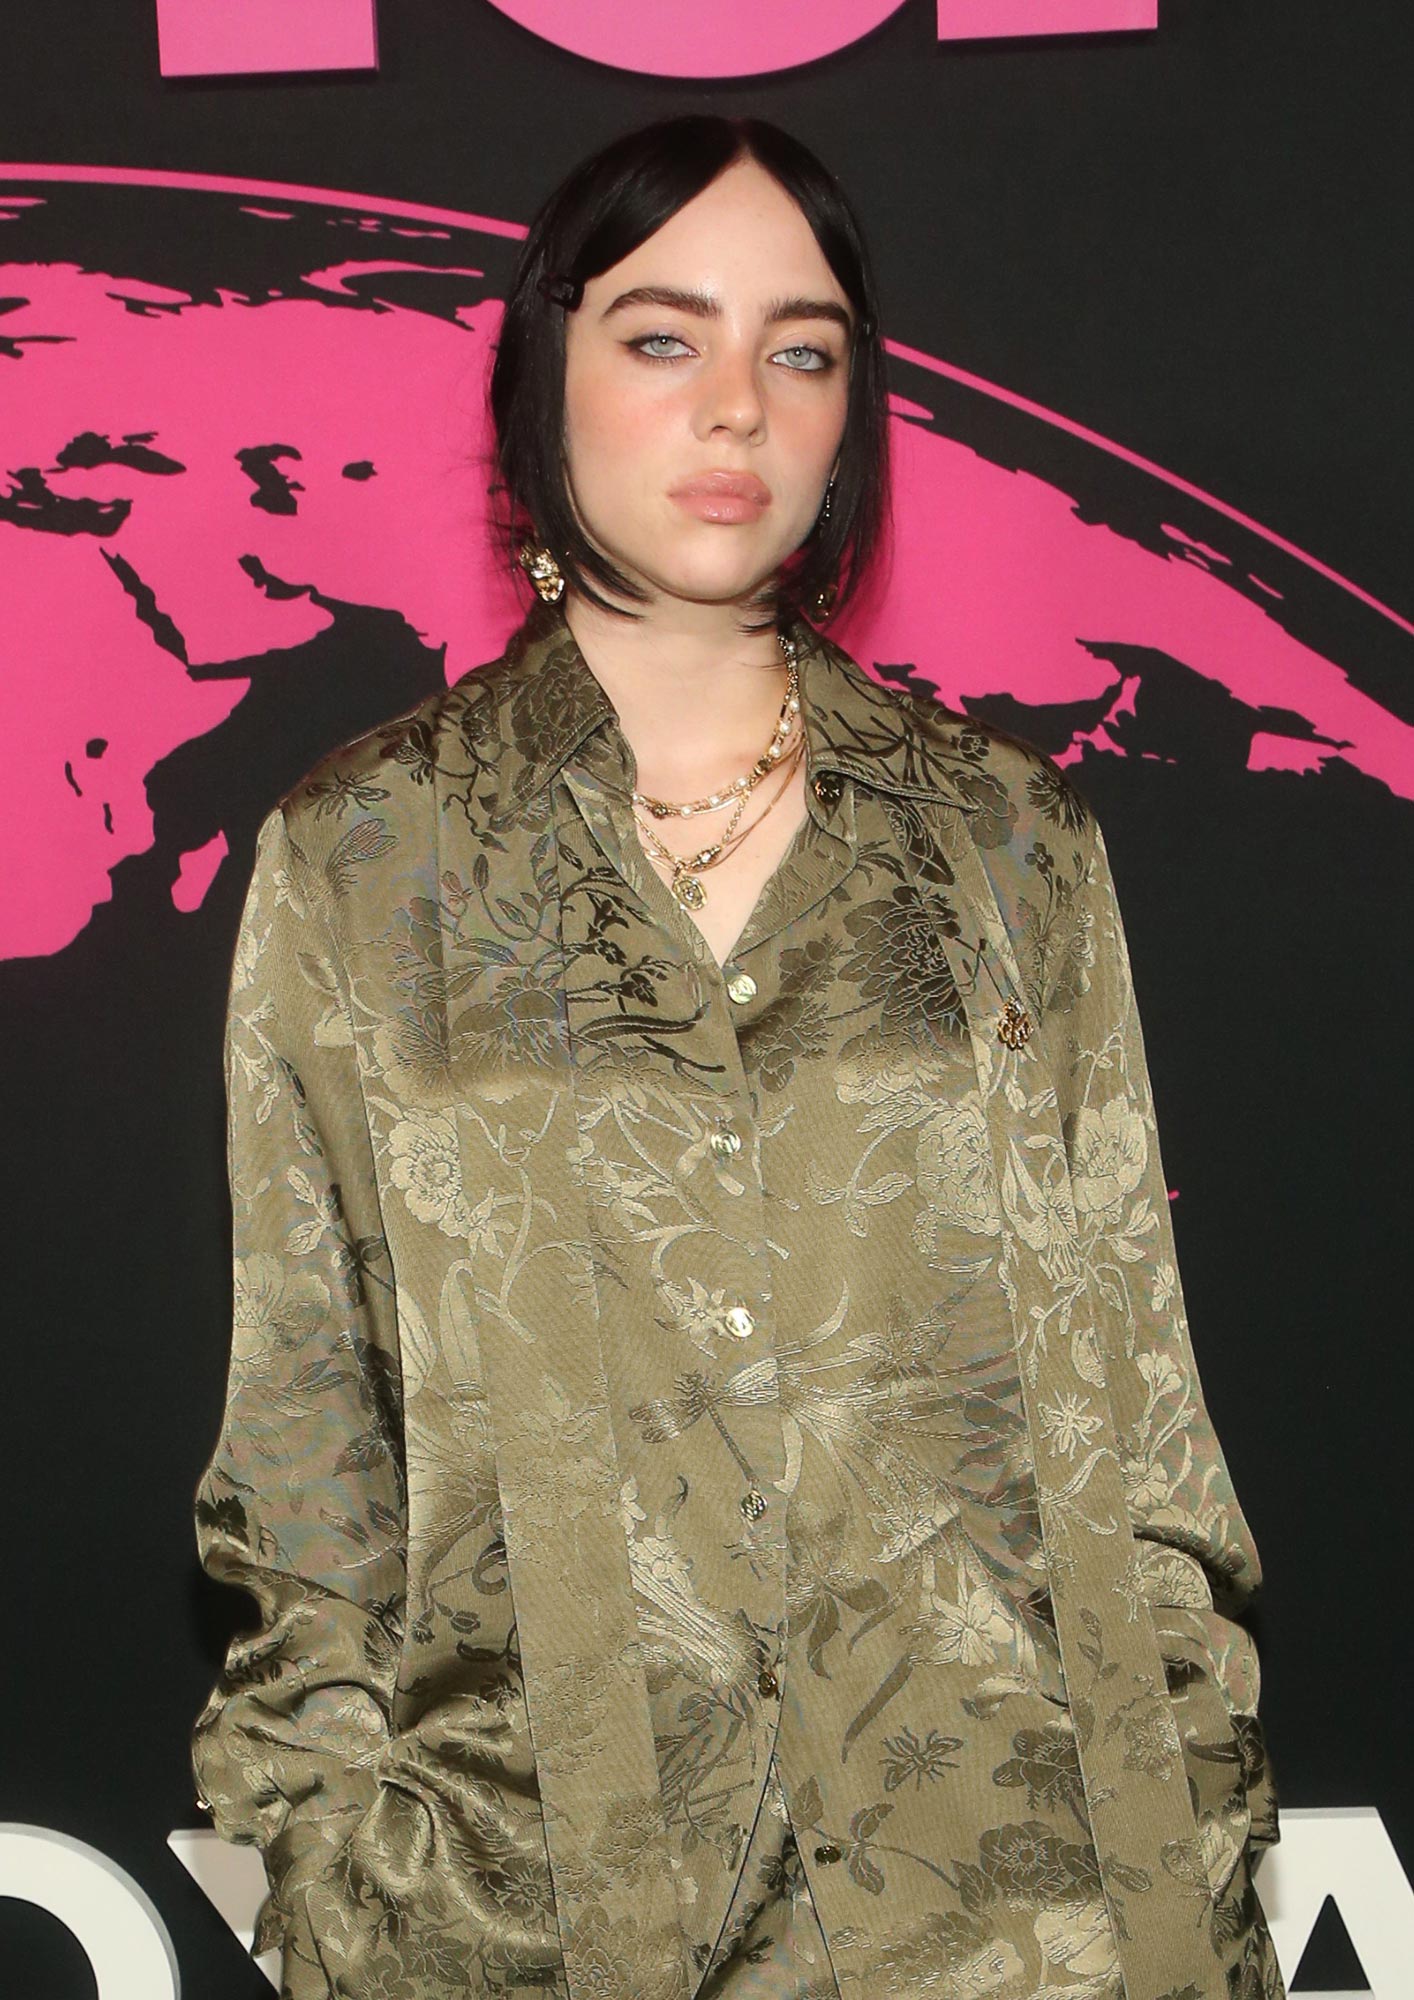 -I-Don-t-Think-I-Would-Be-Able-to-Exist---Billie-Eilish-Gets-Candid-About-Navigating-Body-Shaming-Comments -650